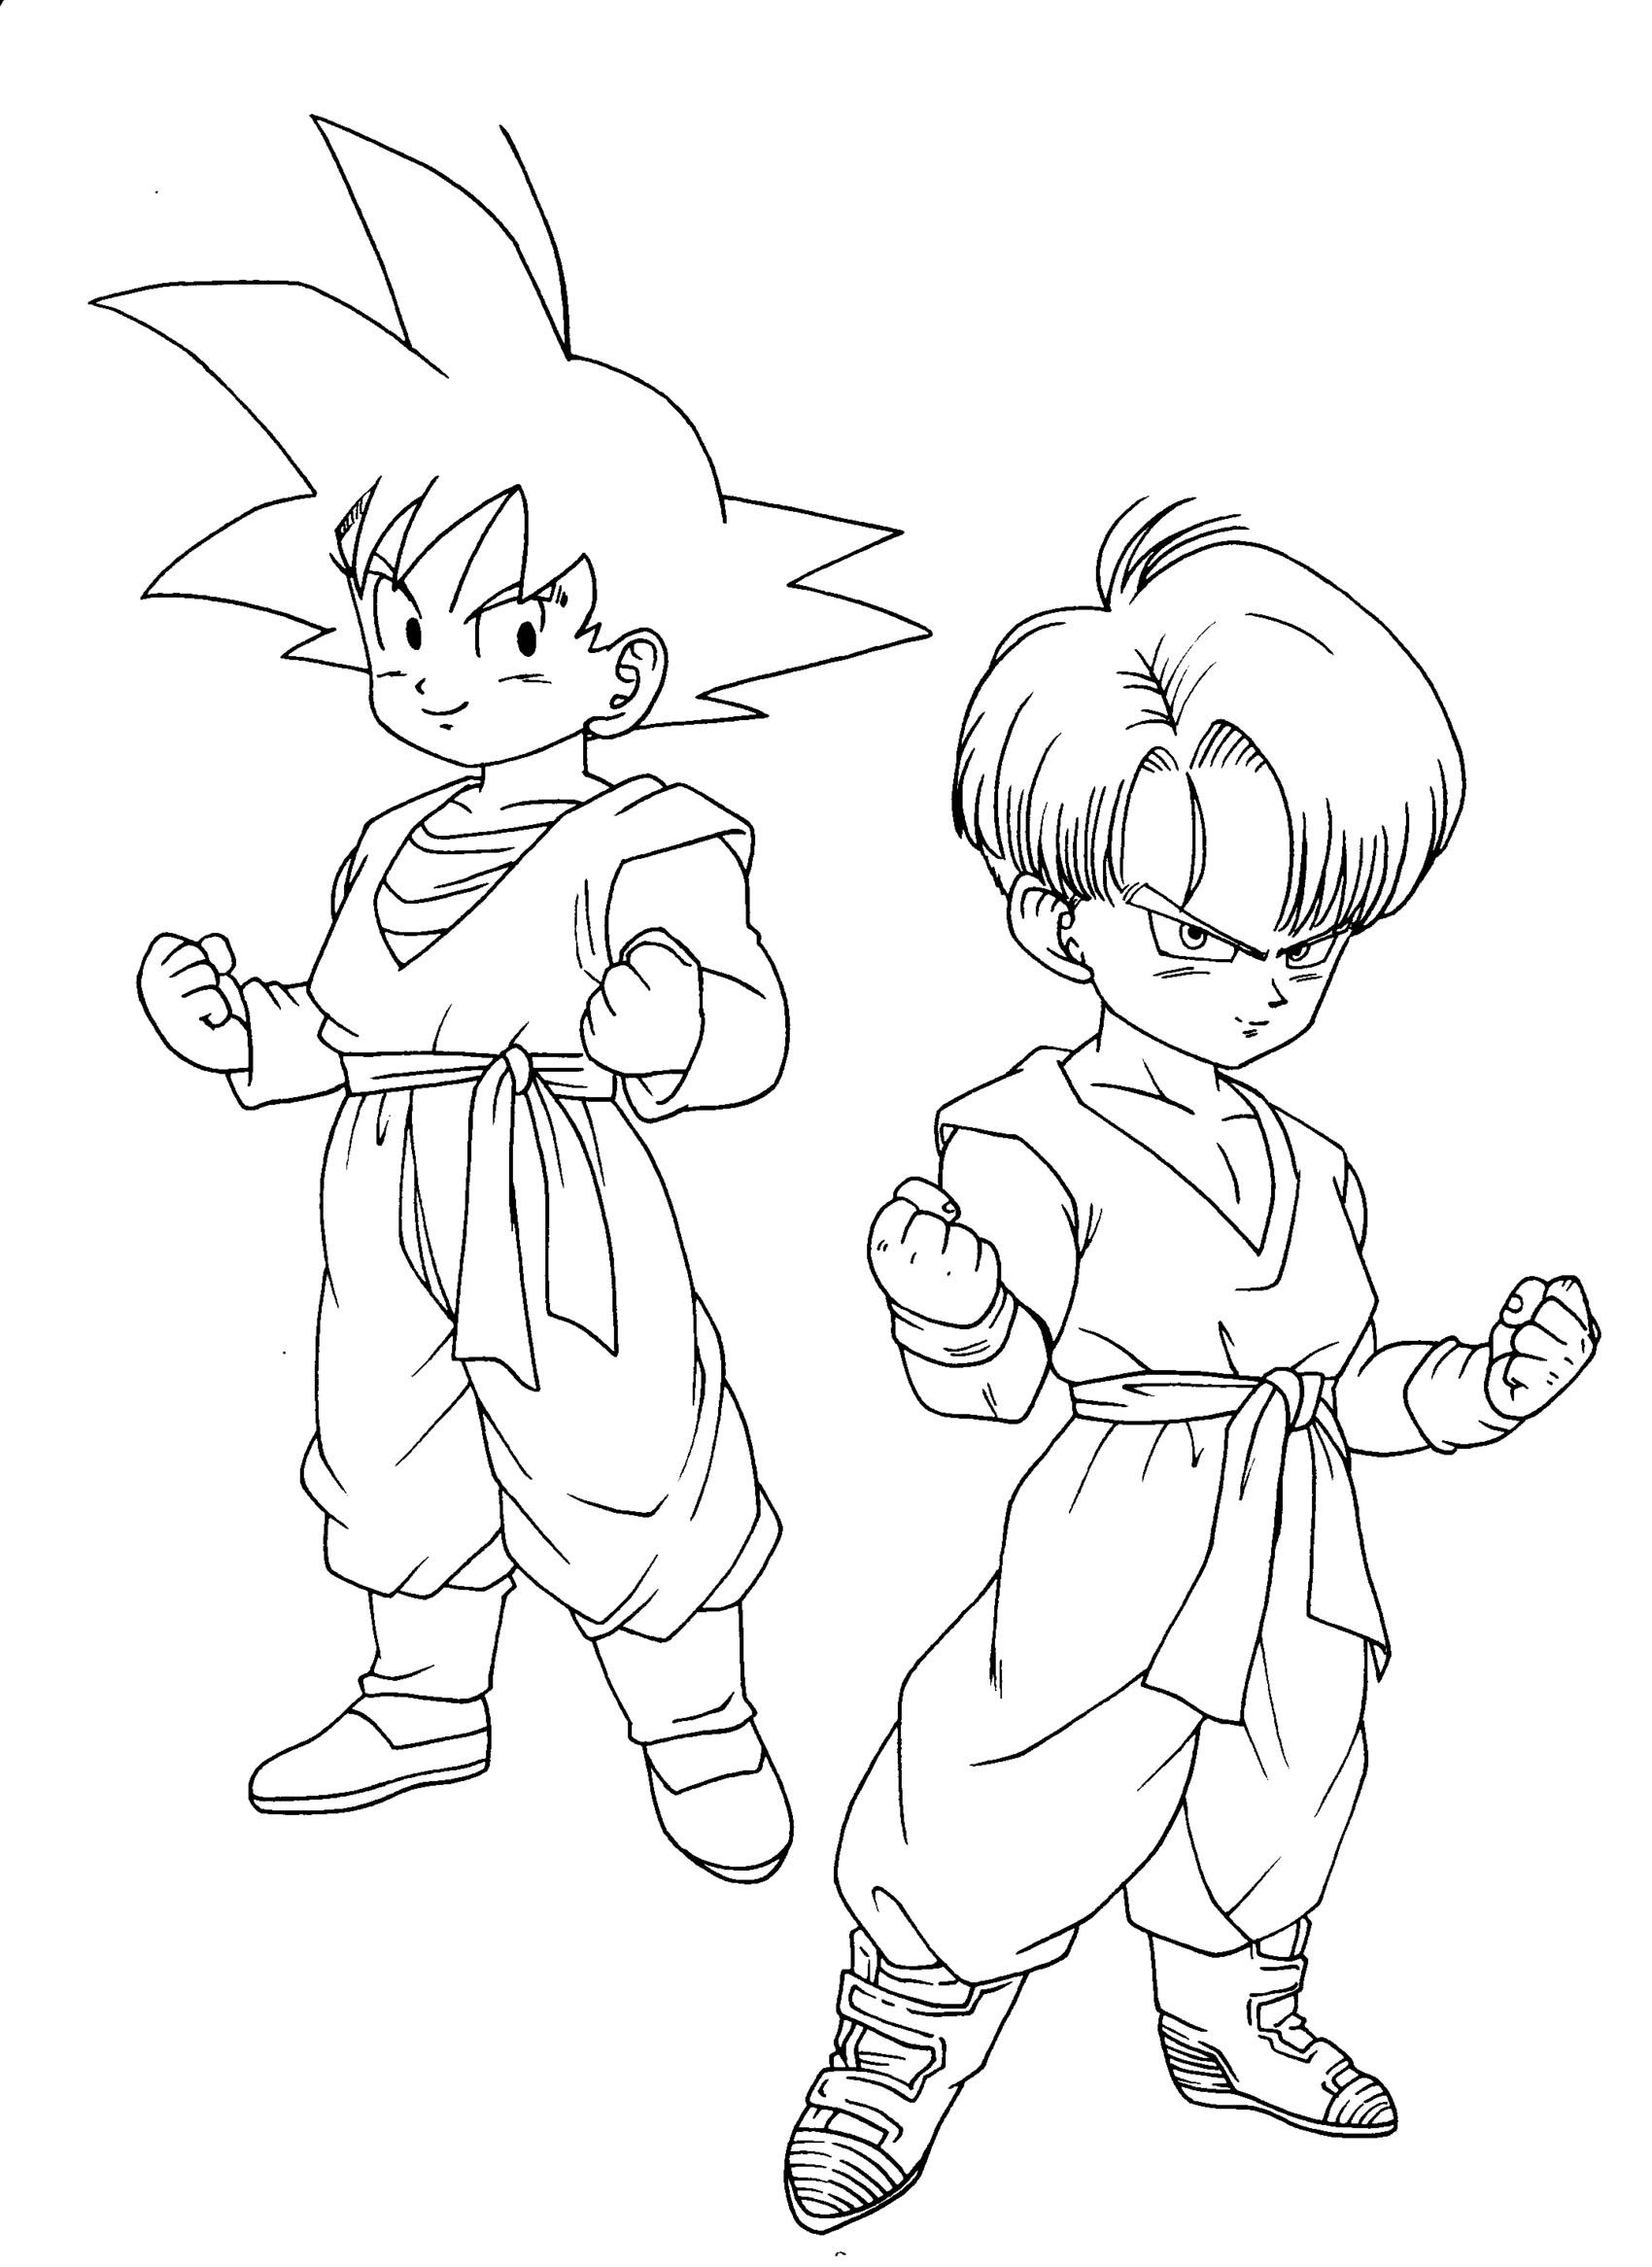 Songoten Trunks Dragon Ball Z Kids Coloring Pages